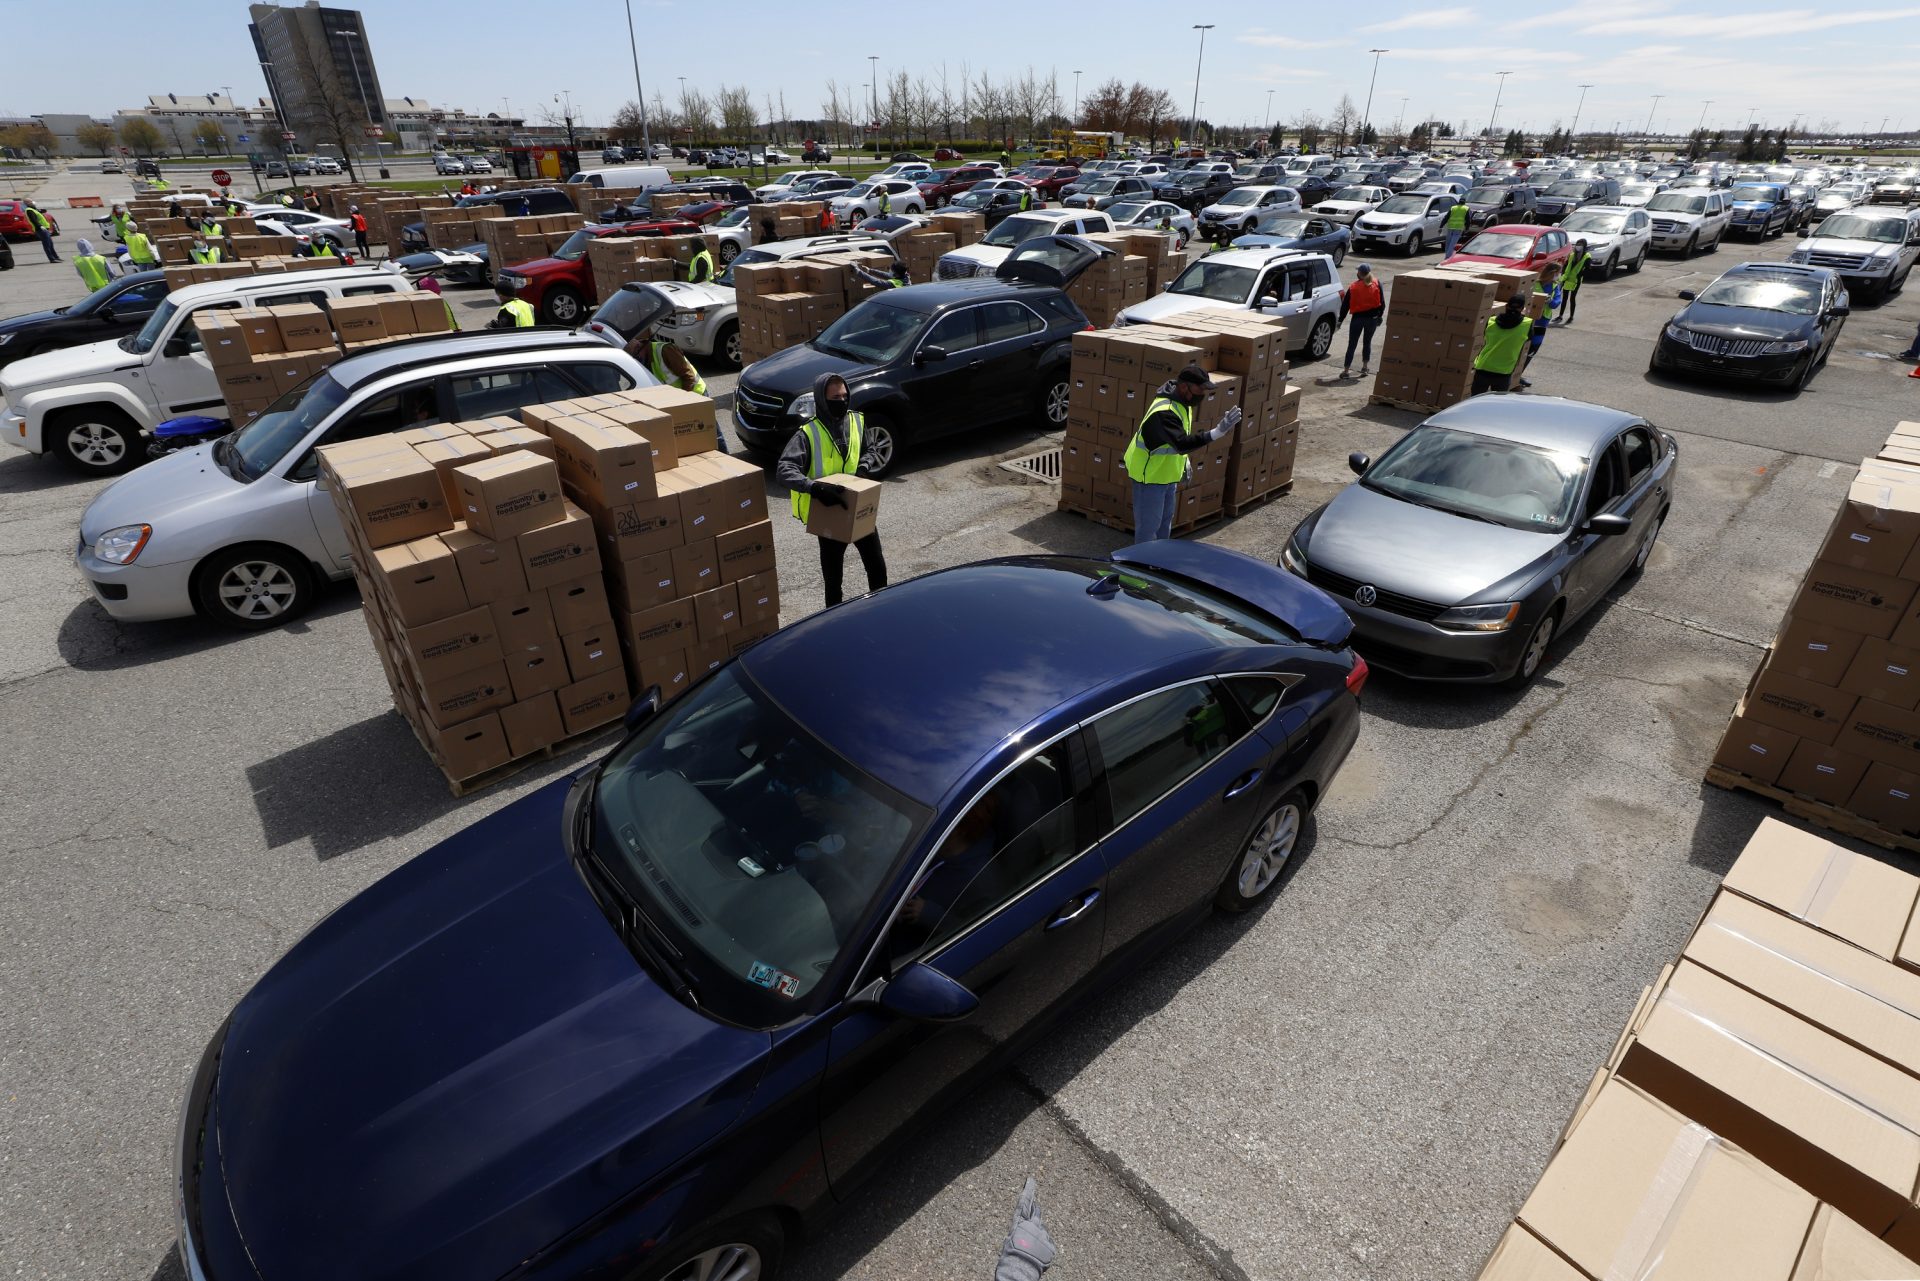 Using part of the Pittsburgh International Airport parking lot, that has been left vacant by the COVID-19 pandemic, volunteers from the Greater Pittsburgh Community Food Bank, load boxes of food into cars during a drive-up food distribution, Wednesday, April 22, 2020.